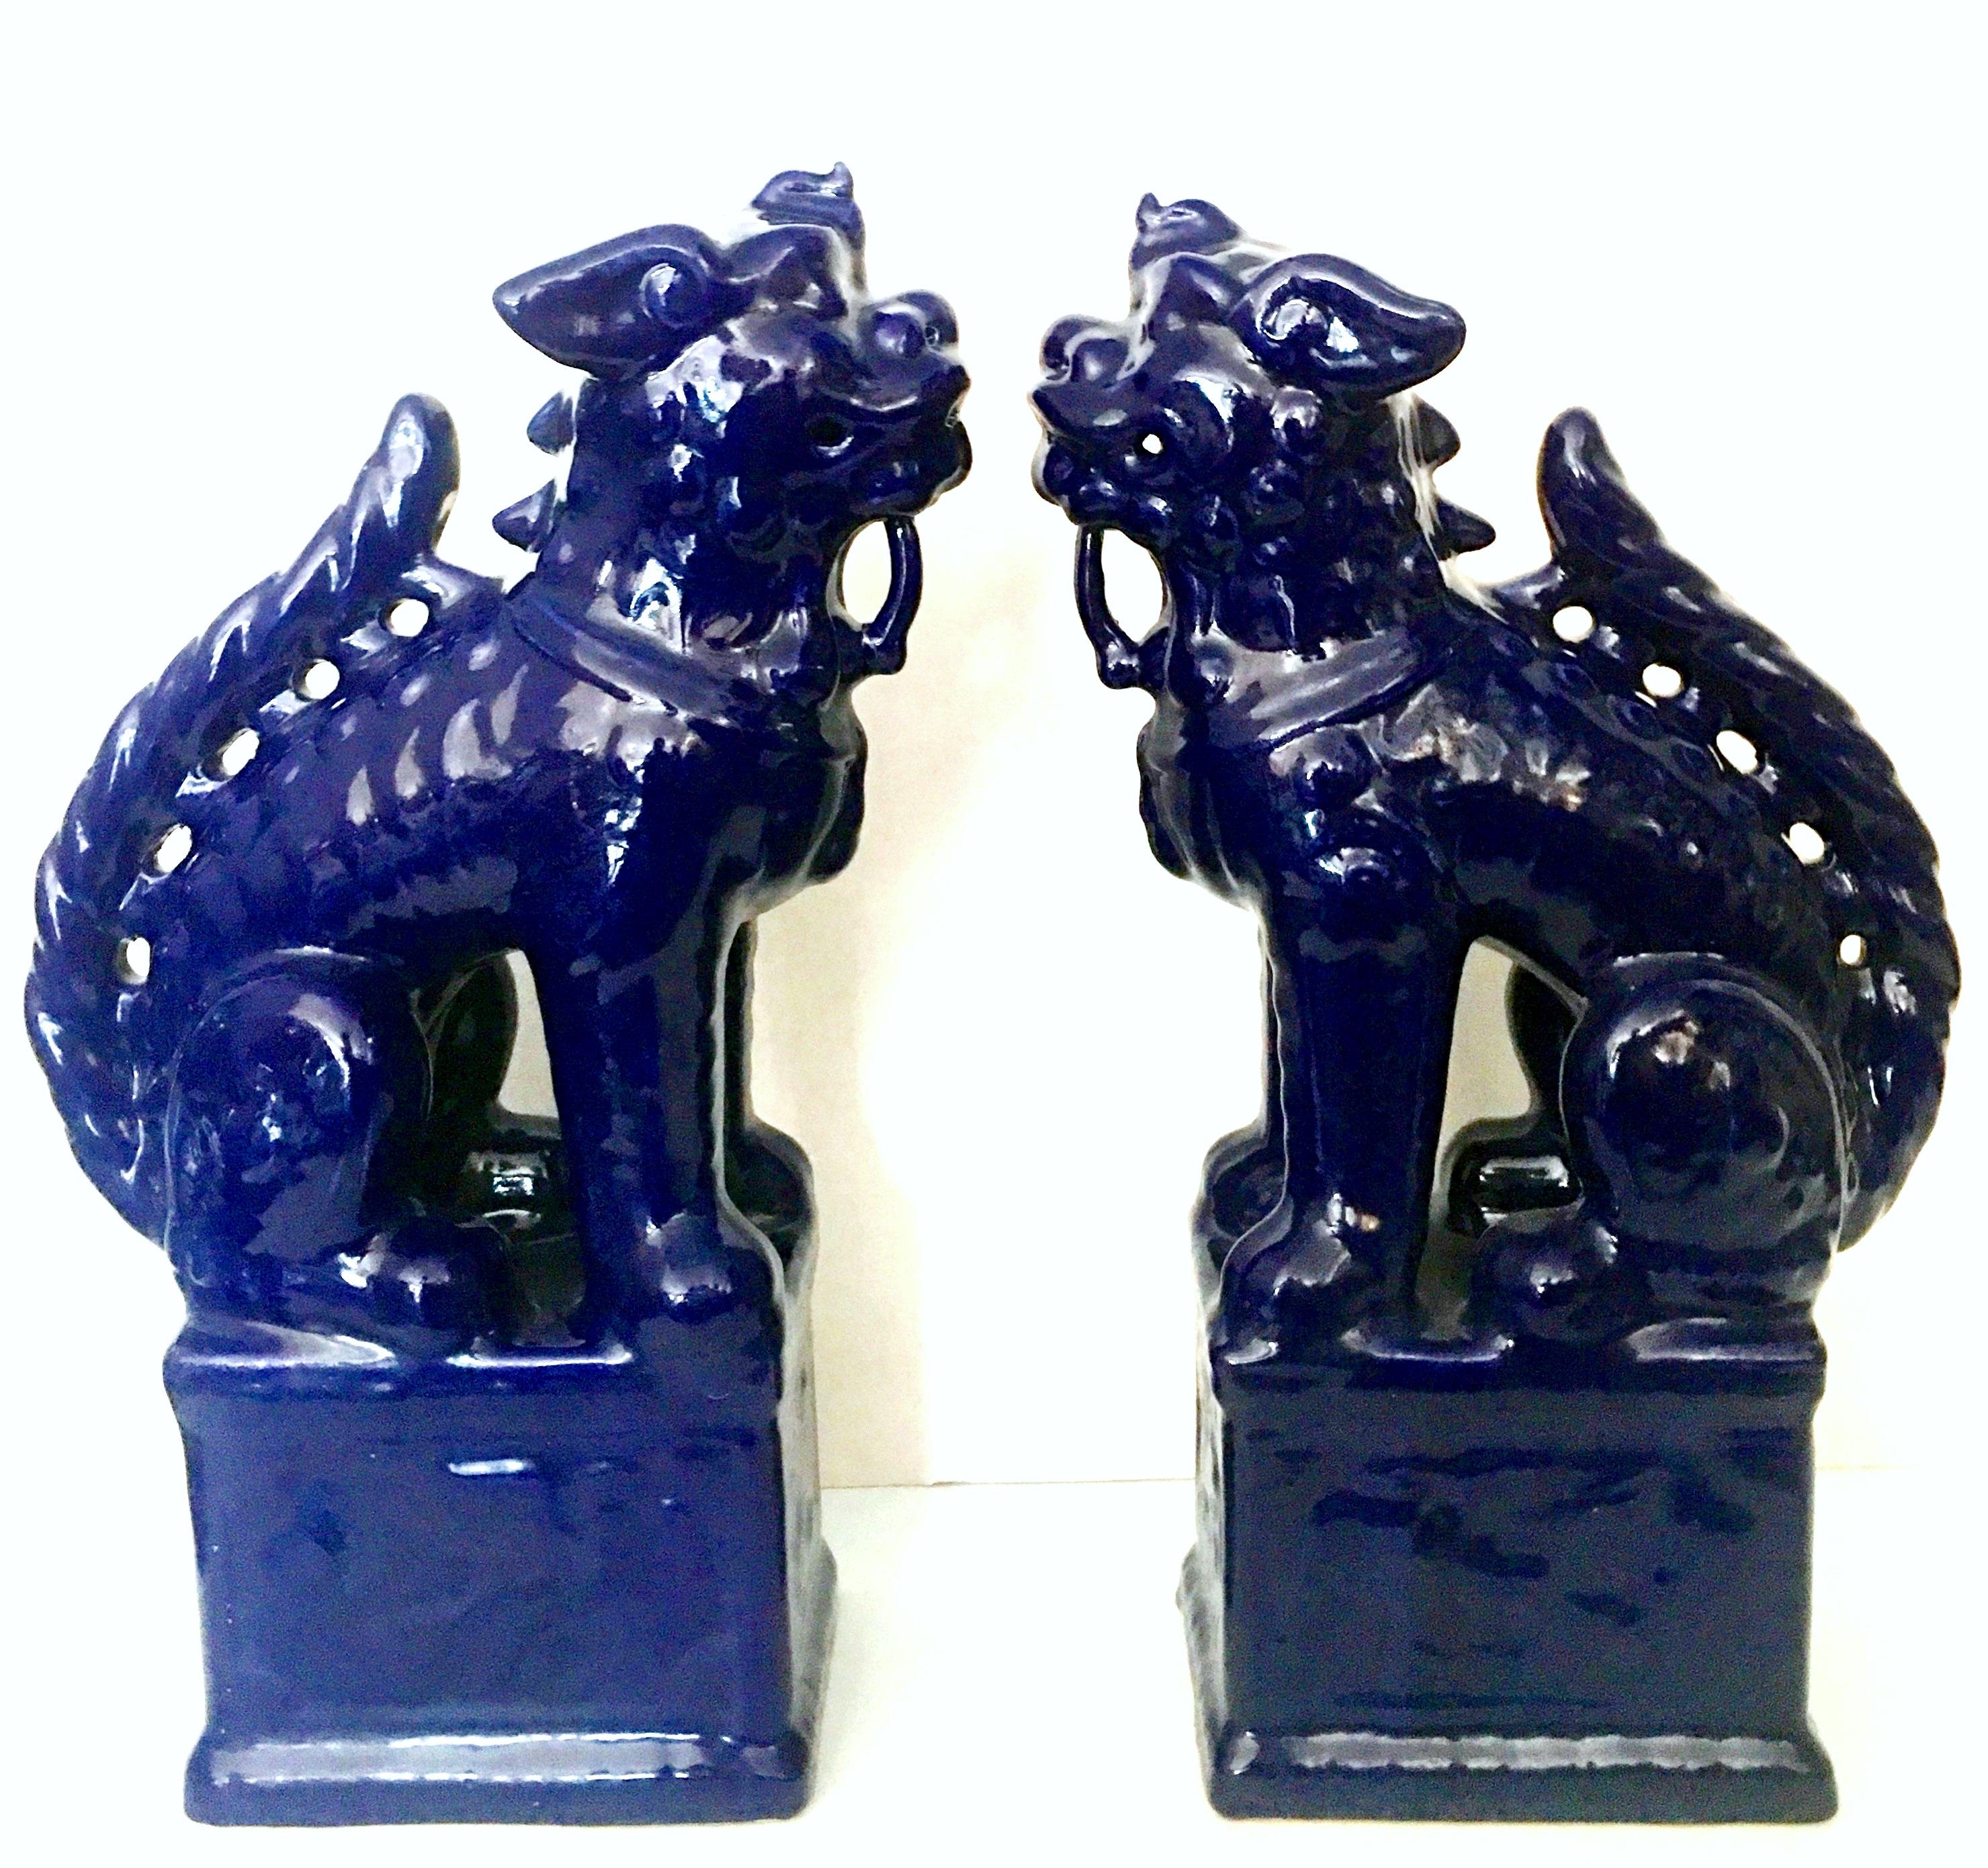 21st Century Pair Of Chinese foo lion sculptures. These tall vibrant cobalt foo dog sculptures are made of glazed ceramic and are a high gloss finish.
New-Floor Sample.